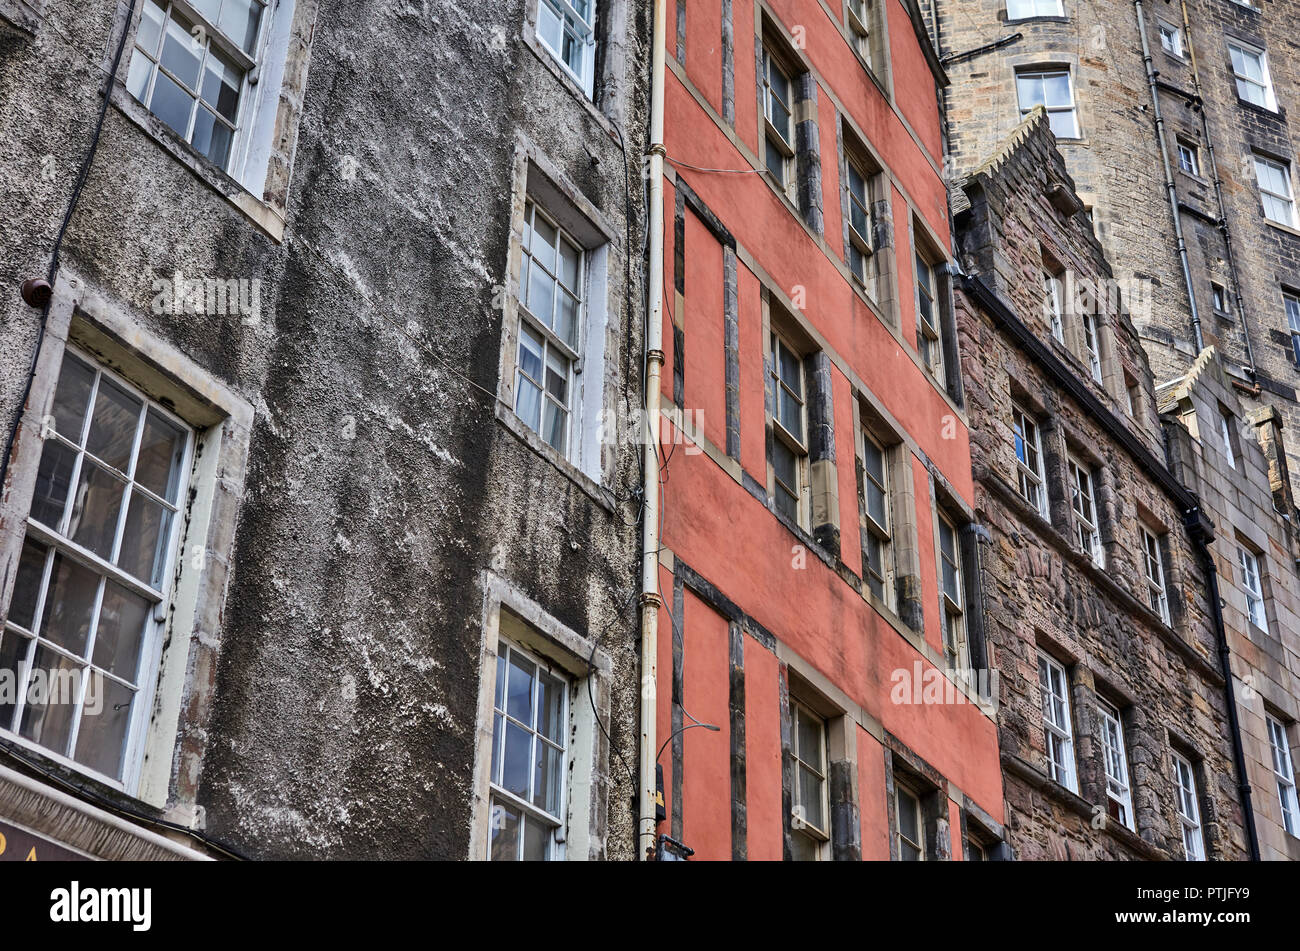 Looking up towards many old buildings in Edinburgh. Stock Photo